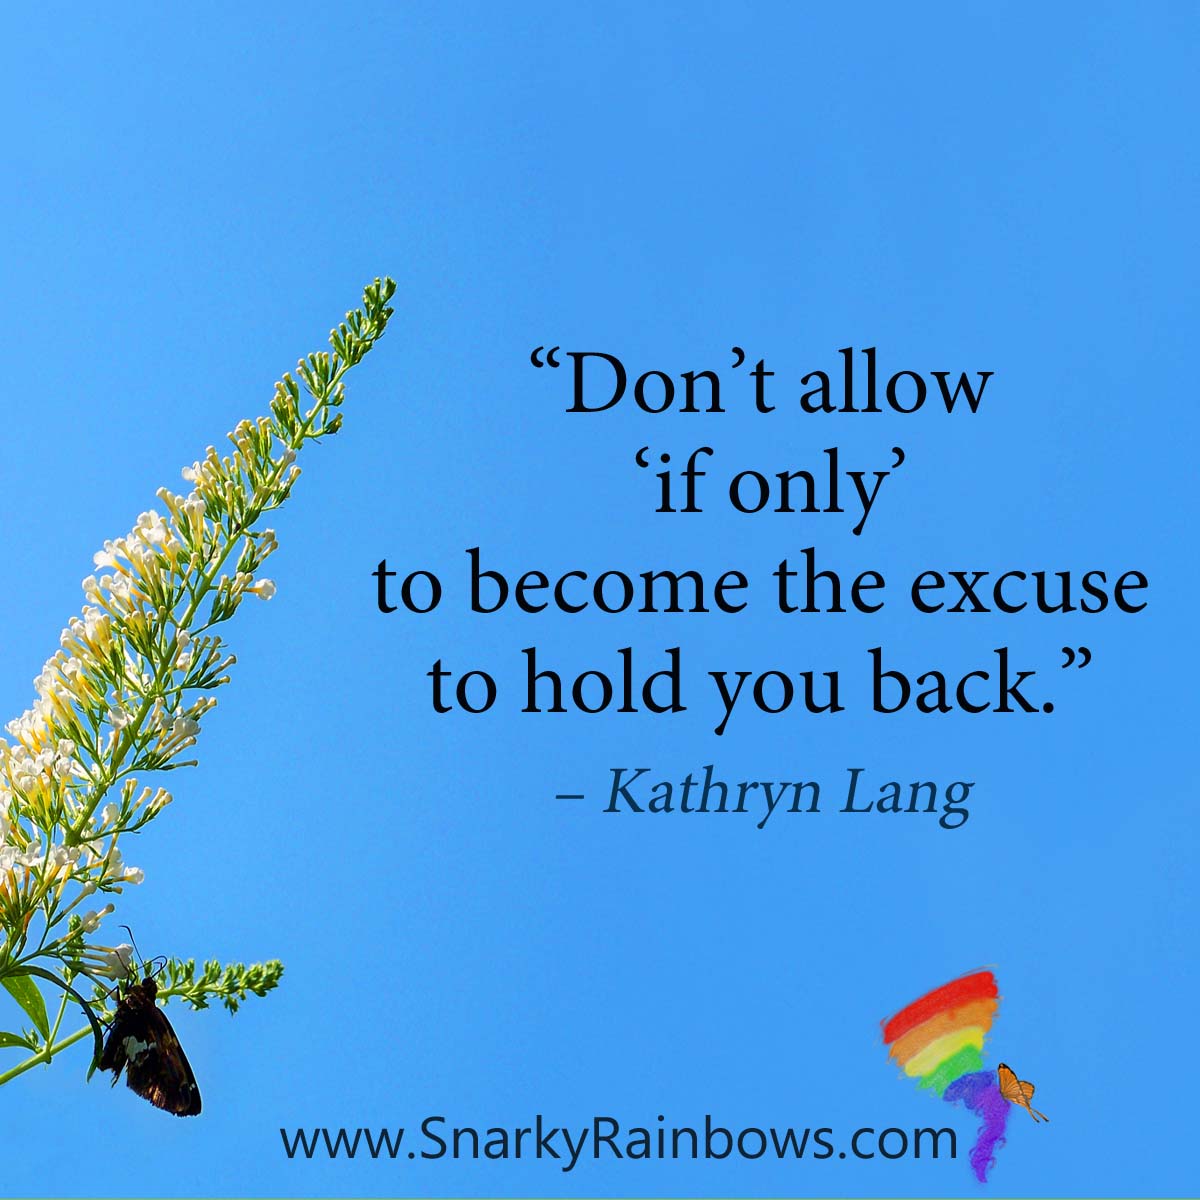 #QuoteoftheDay - if only hold you back